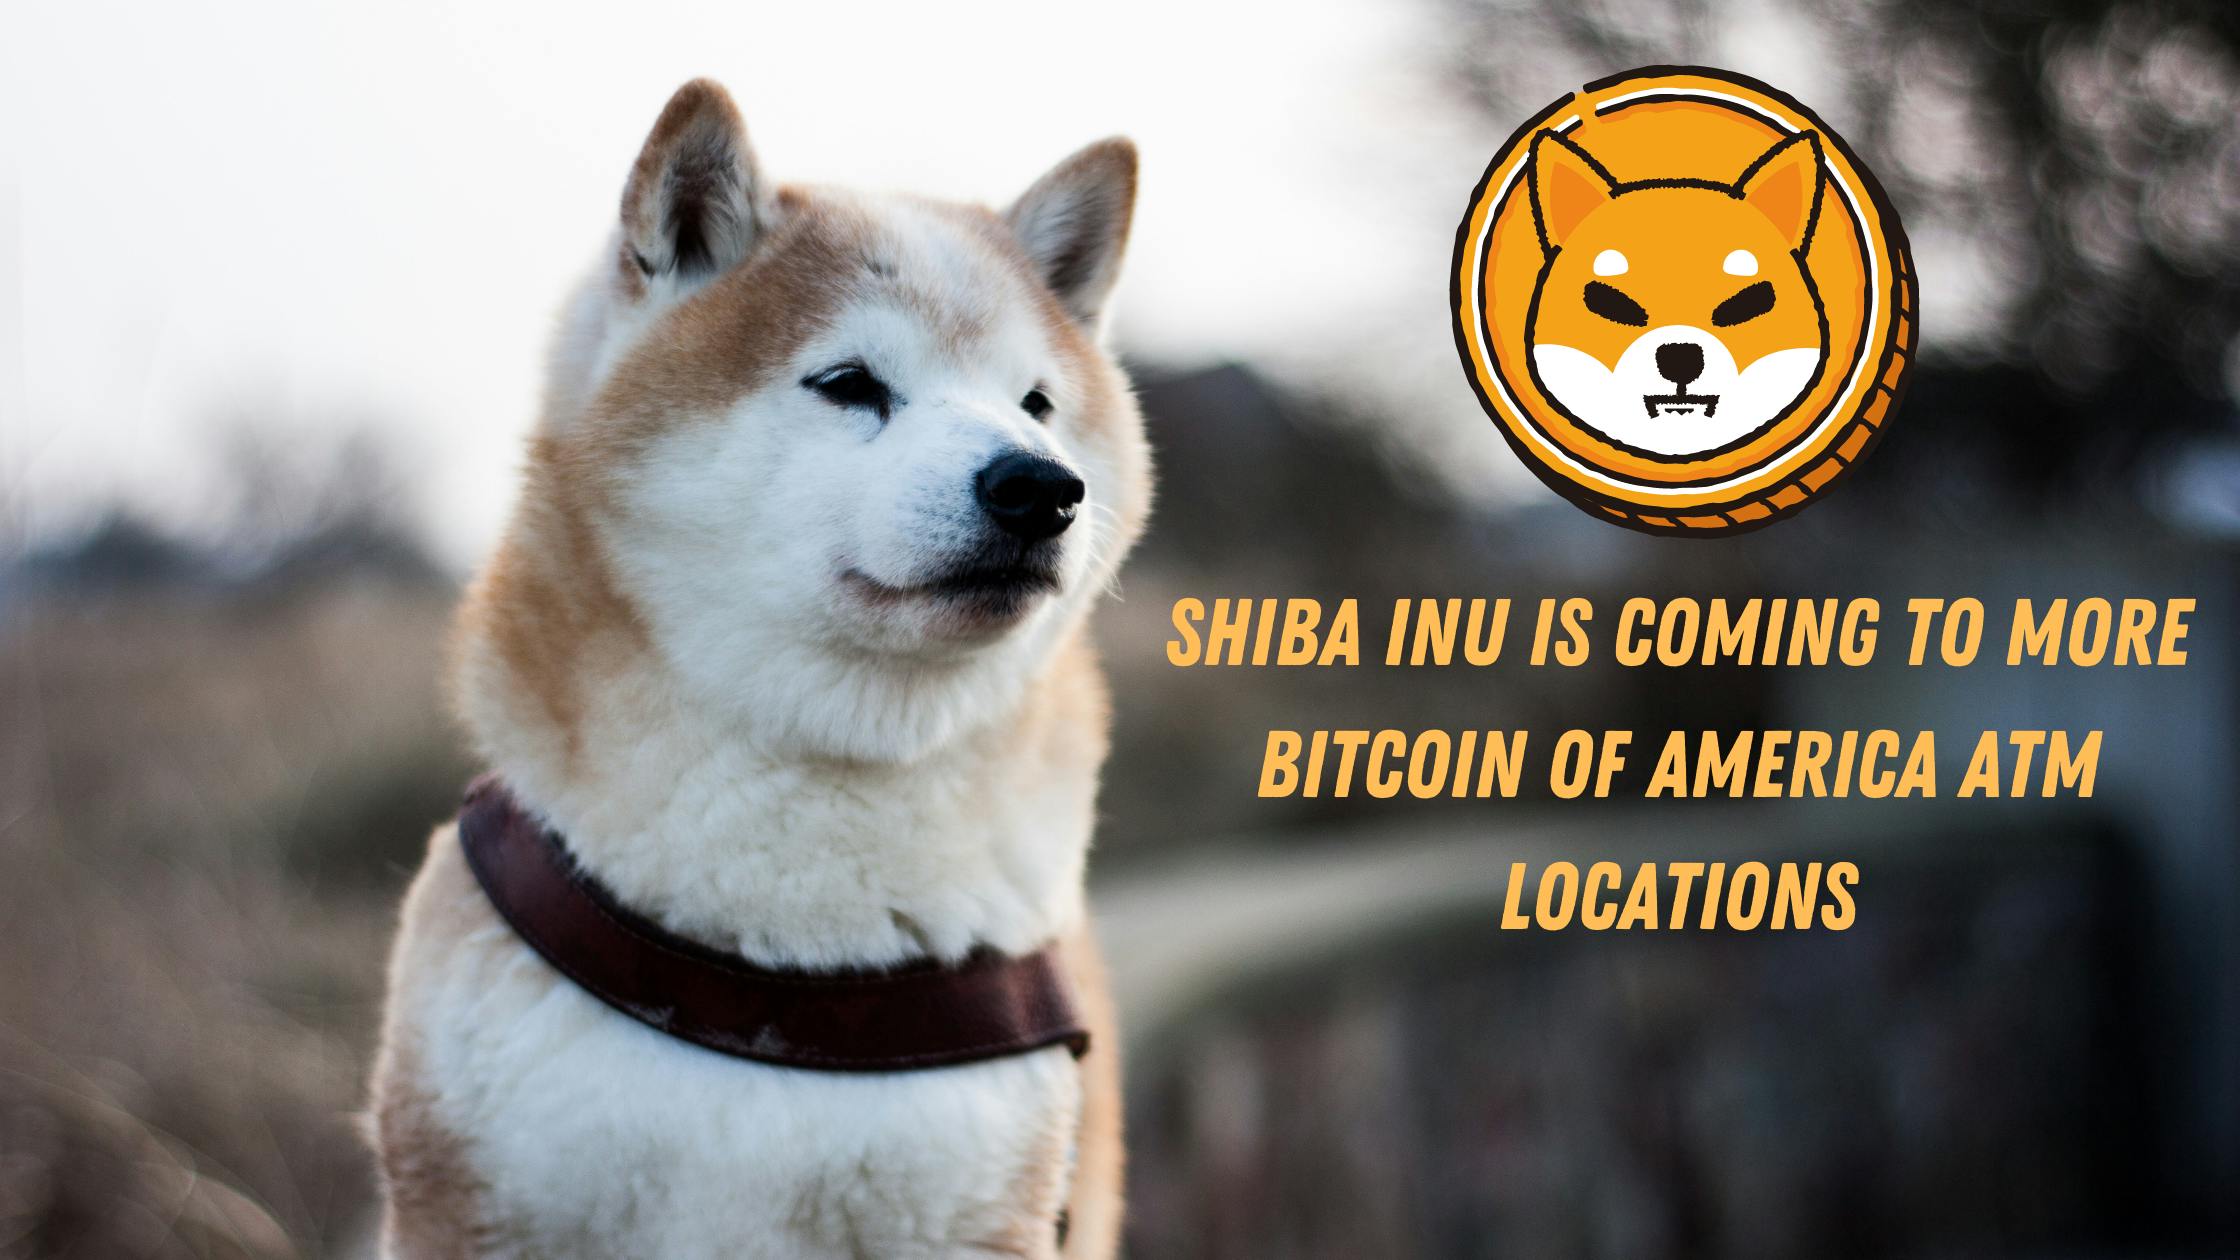 Shiba Inu Is Coming to More Bitcoin of America ATM Locations